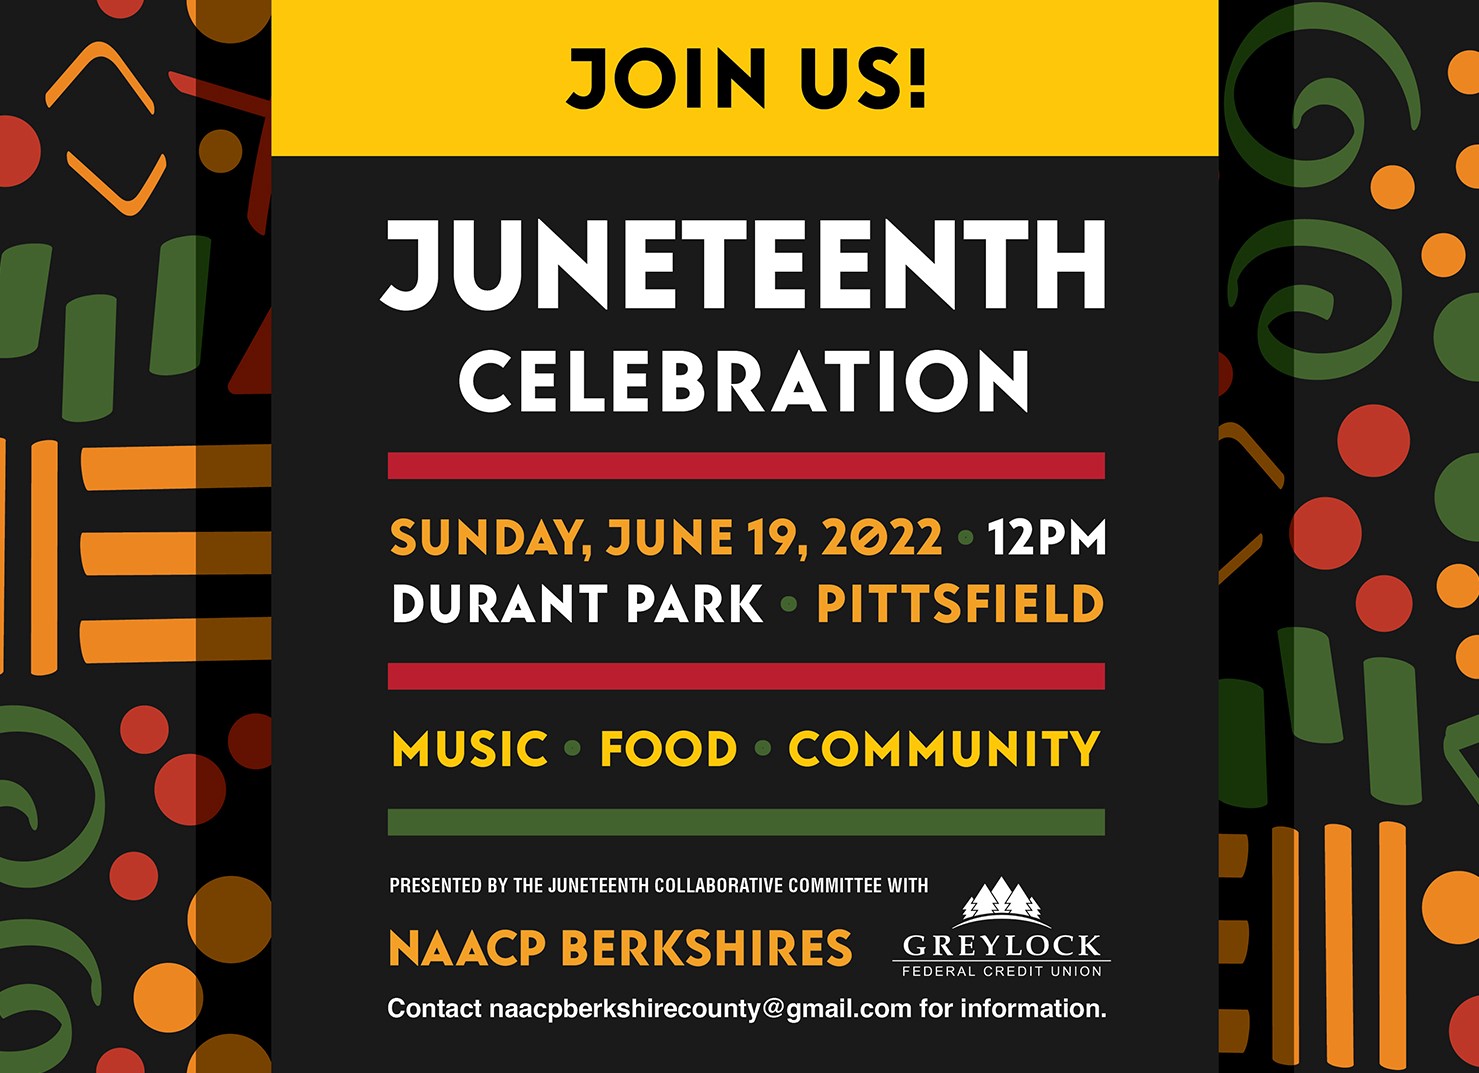 Juneteenth Collaborative Committee to Host Juneteenth Celebration Celebrating Black Independence Day, Pittsfield MA